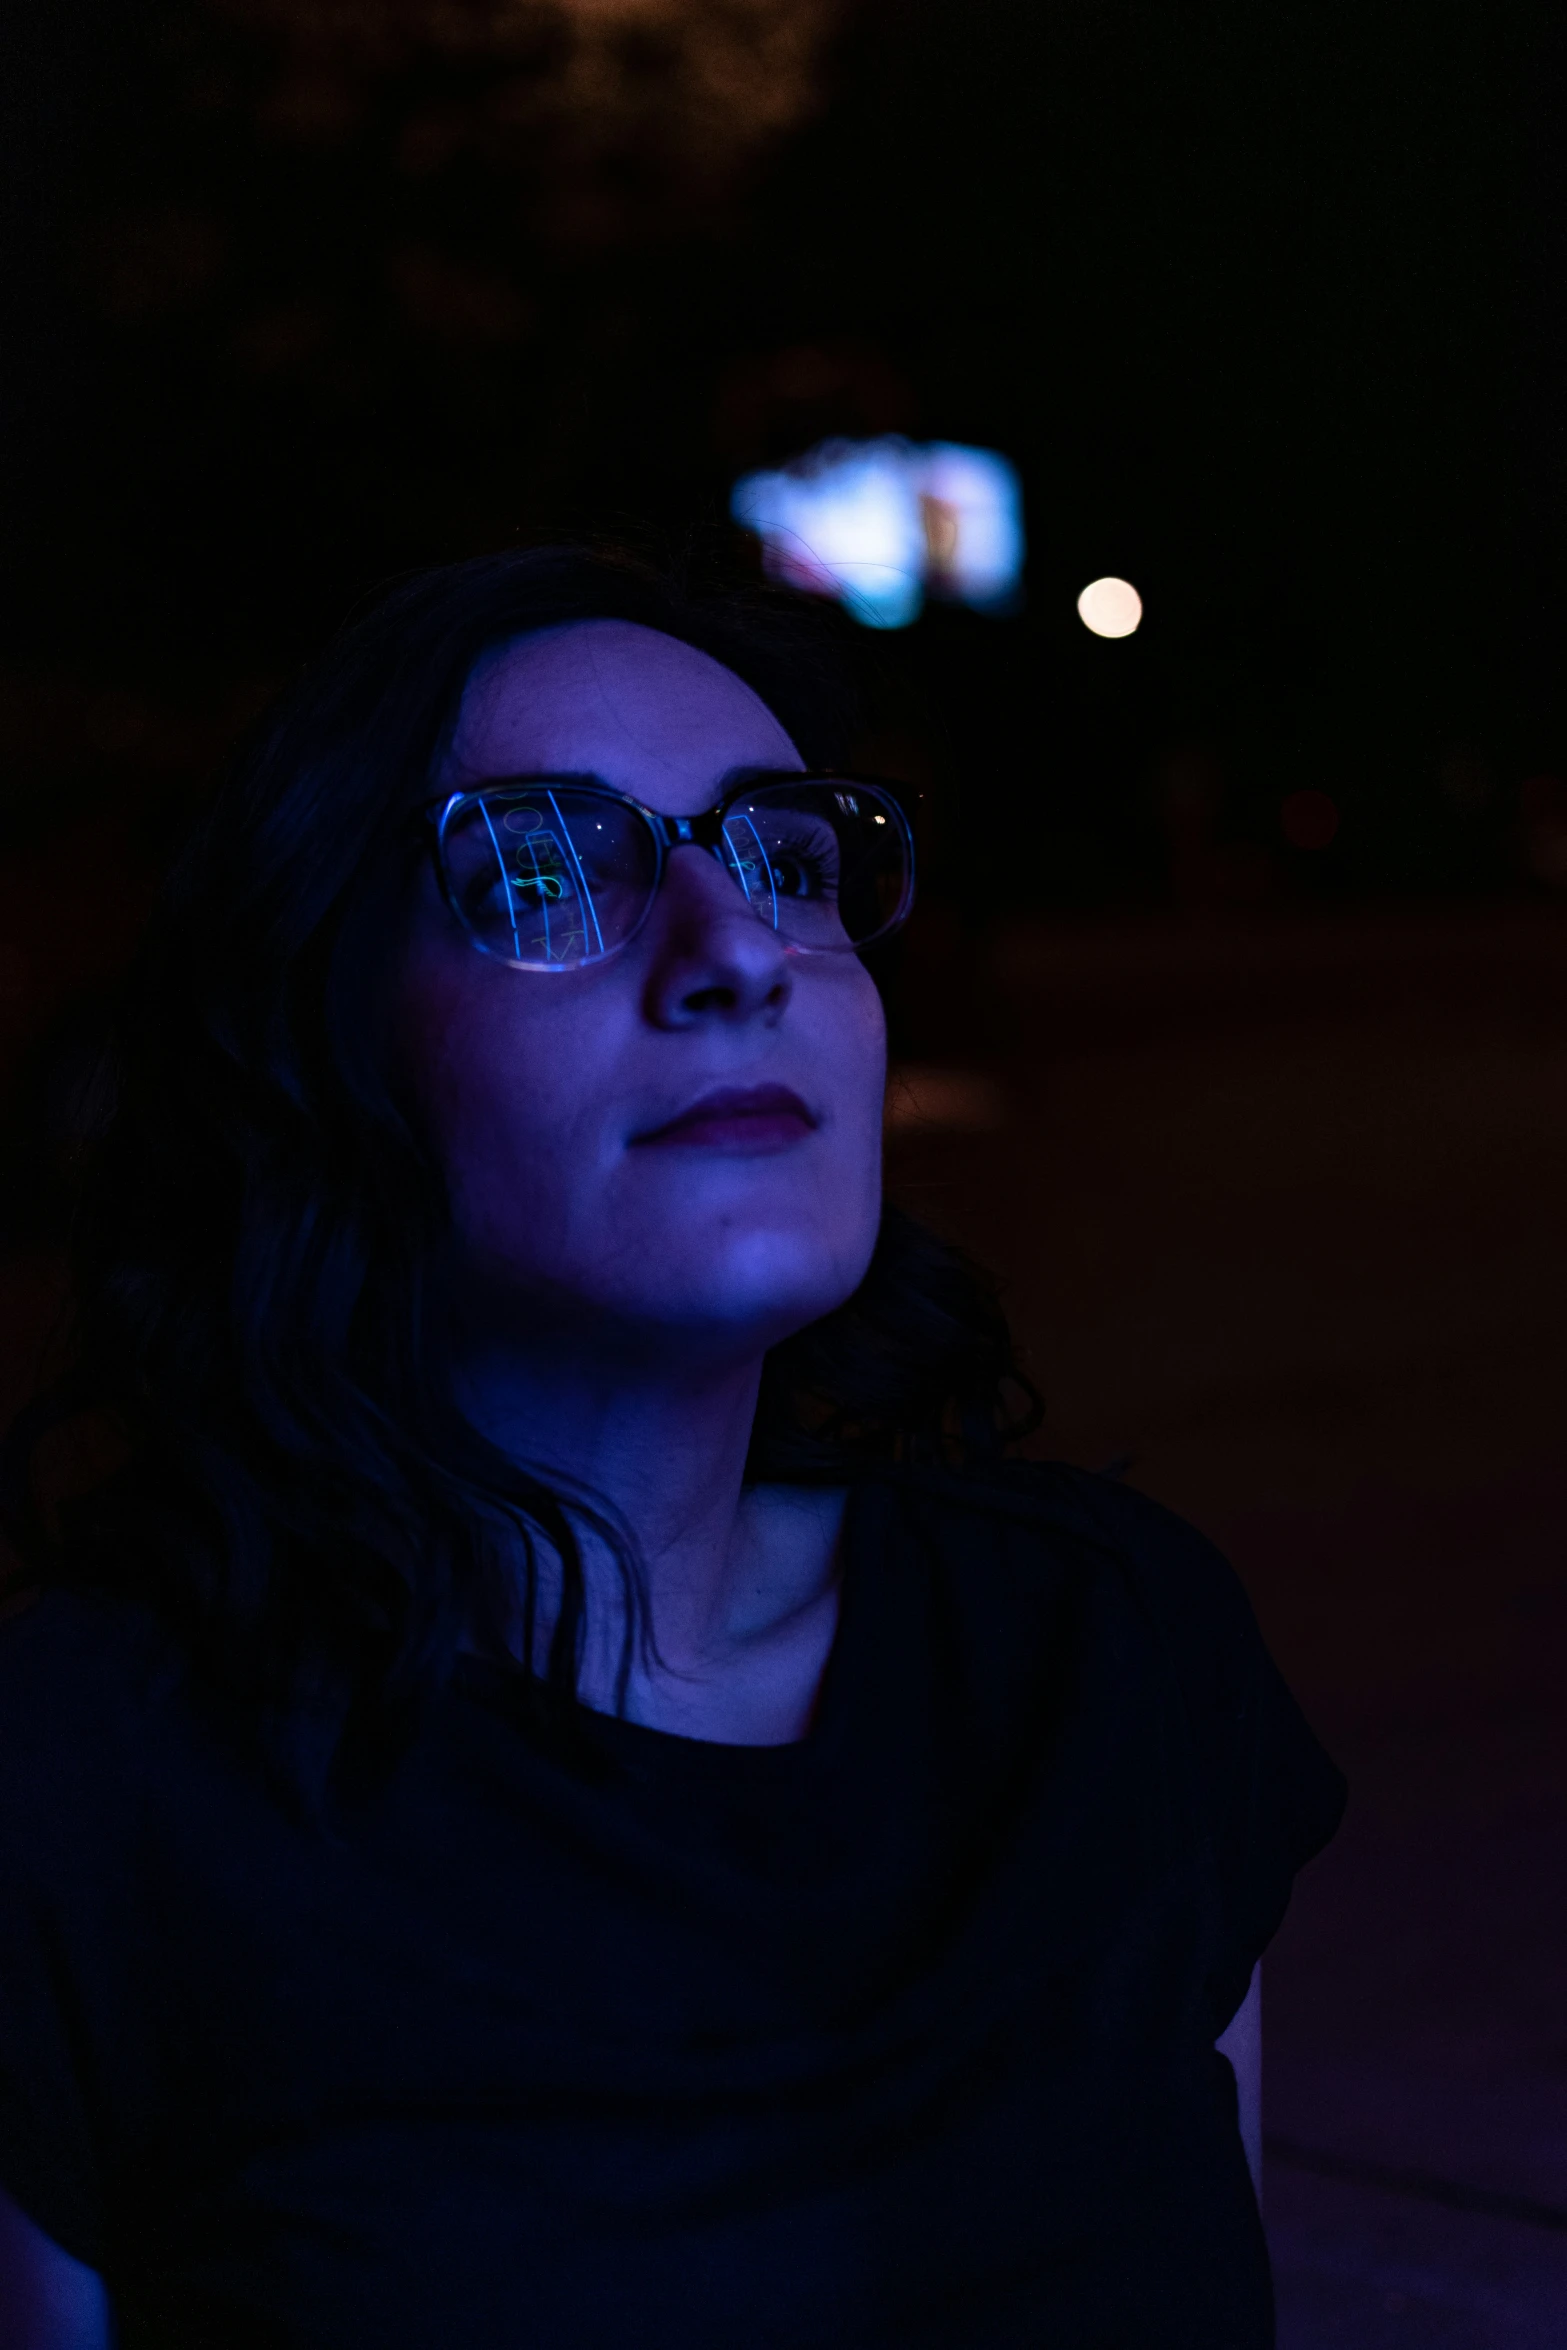 woman with glasses at night in the dark